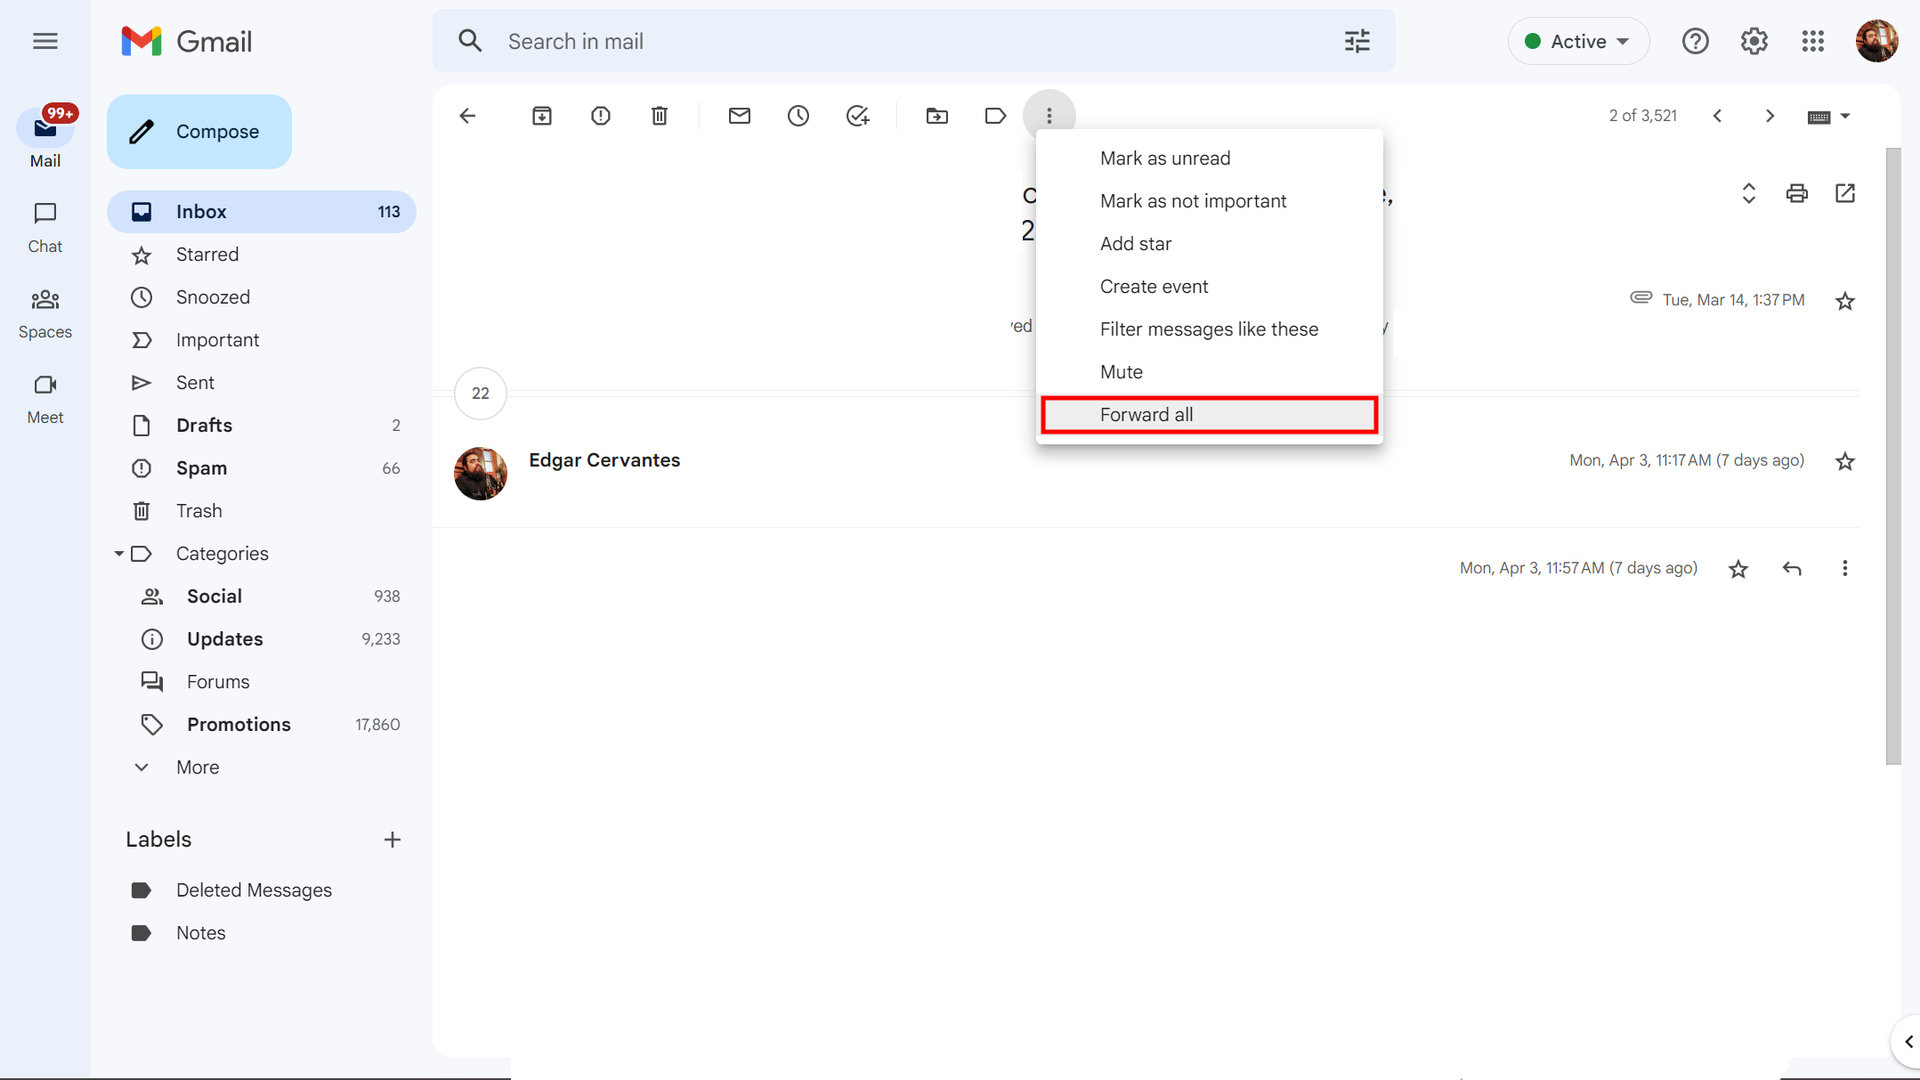 How to download all attachments from a Gmail conversation 2